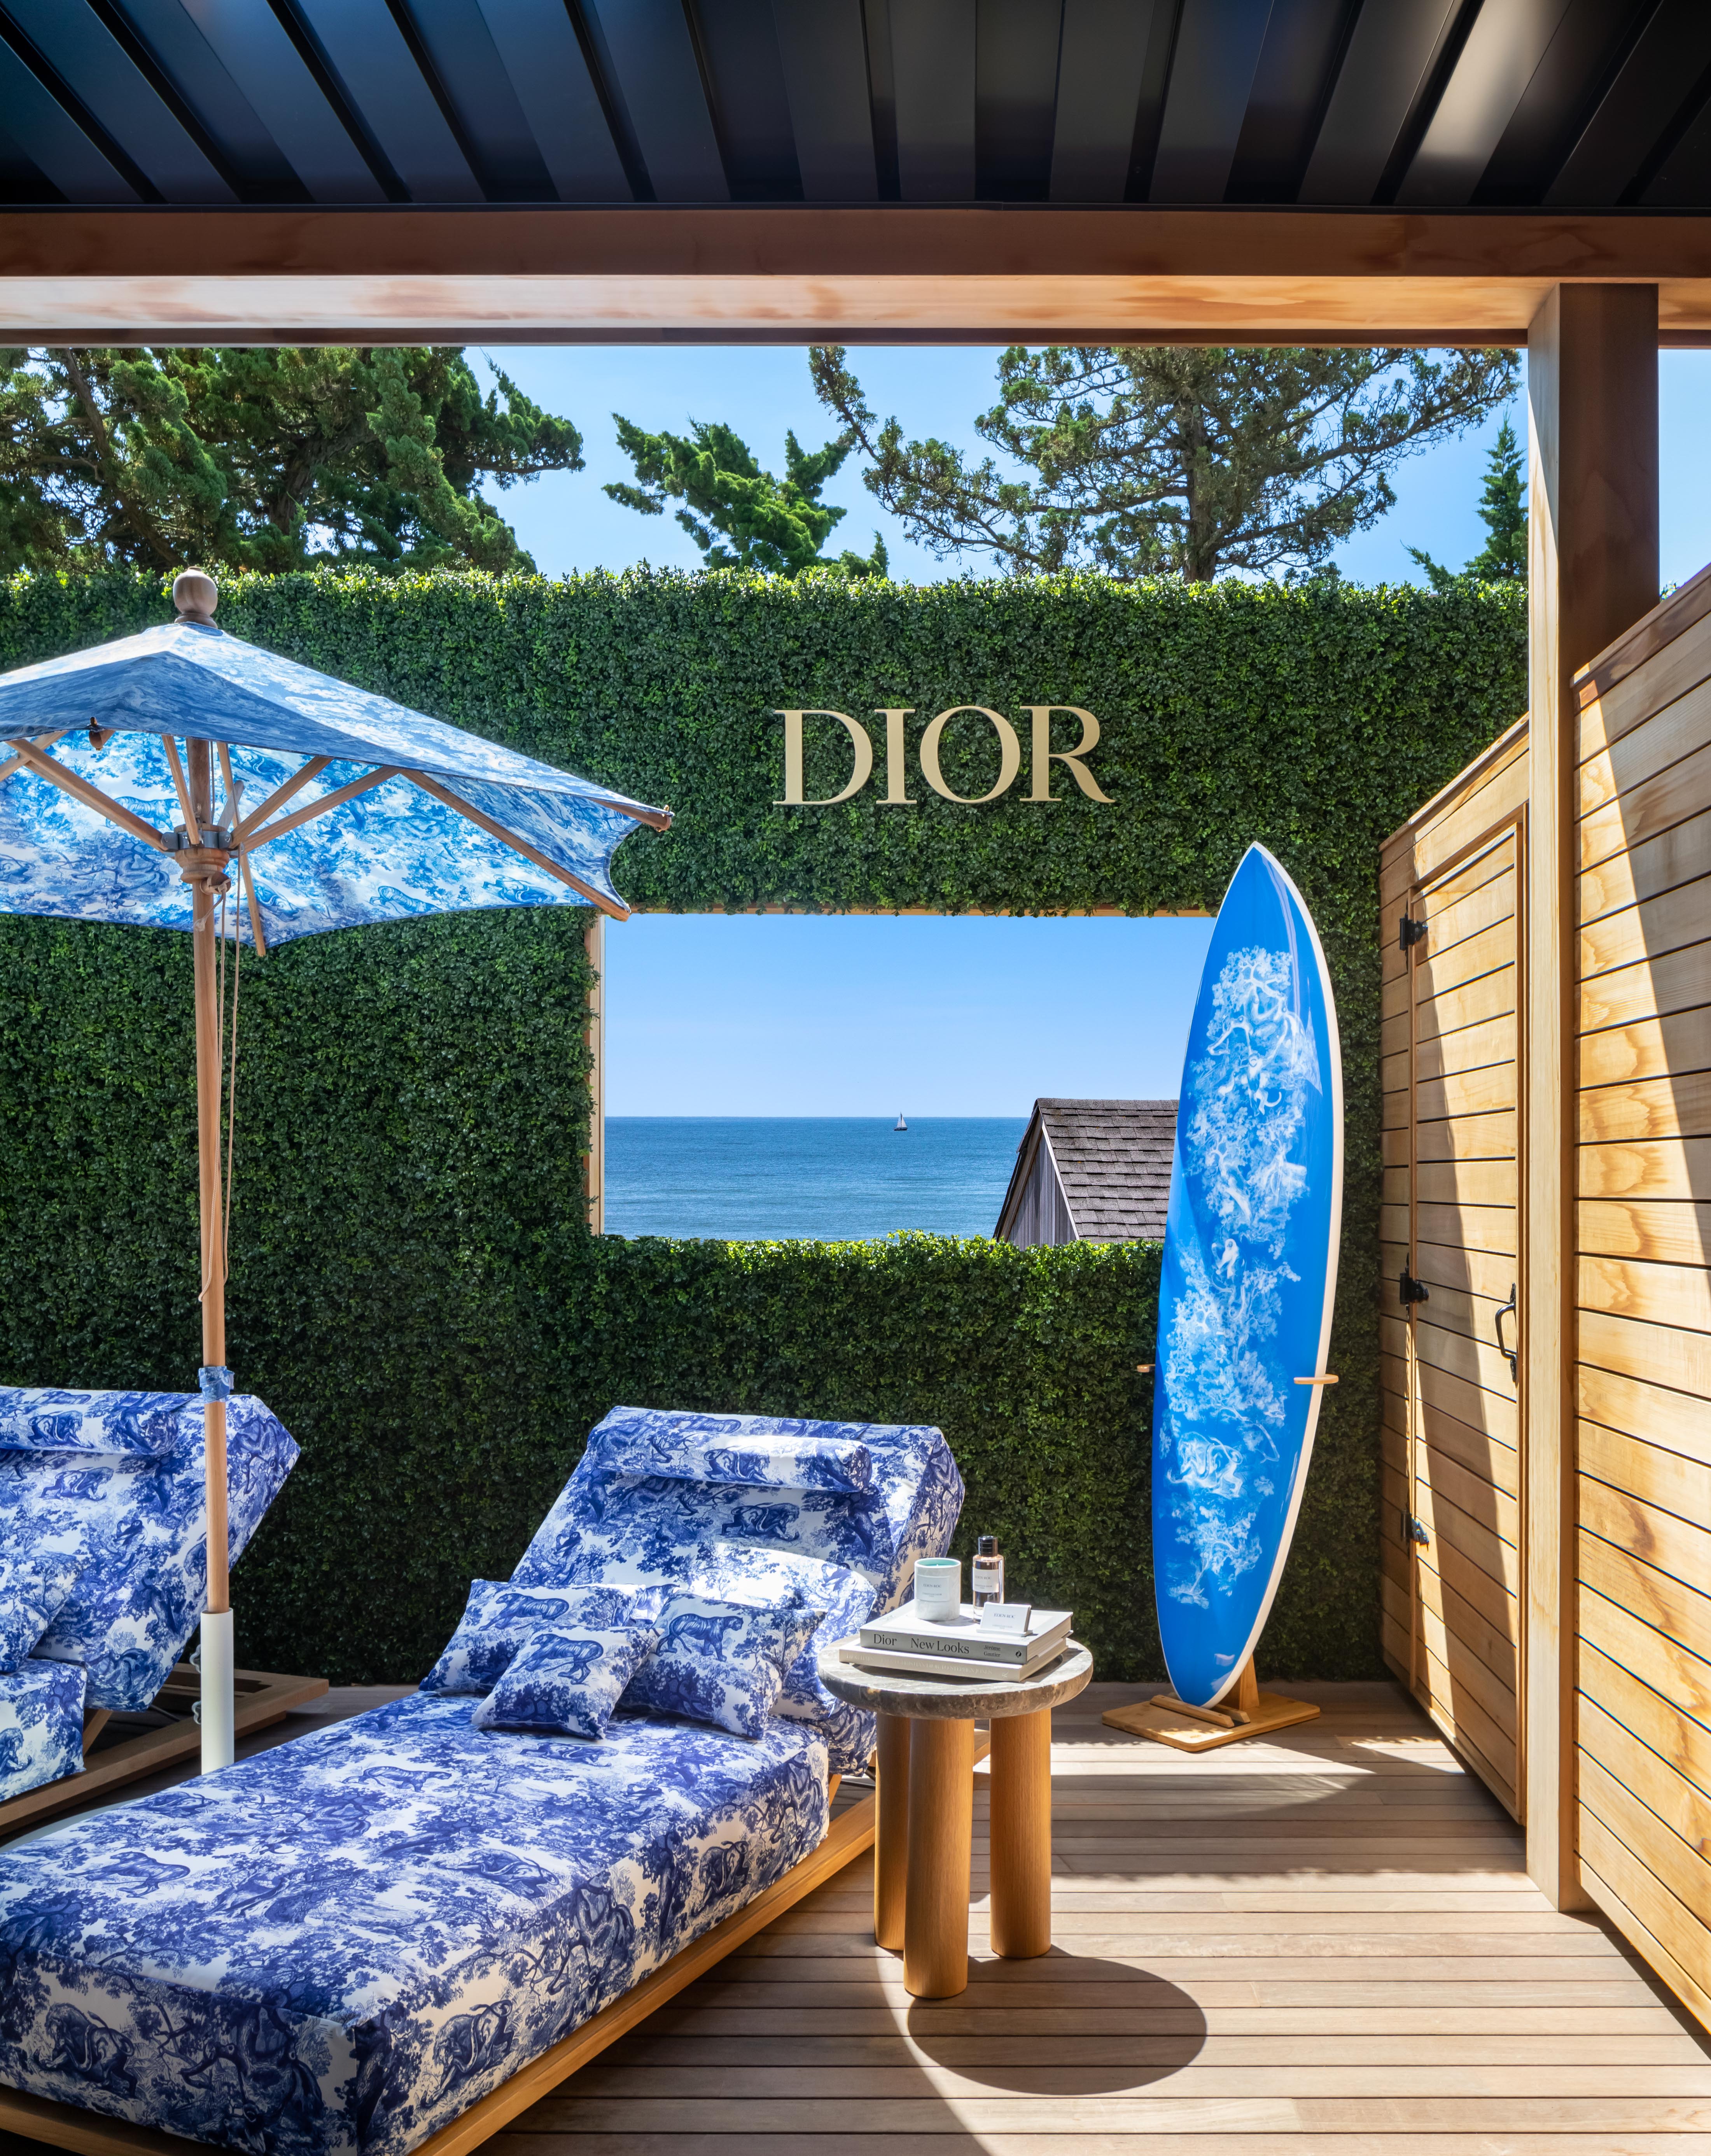 Outdoor lounge area of Dior Seawater Spa treatment room with lounge chair and Dior decor.